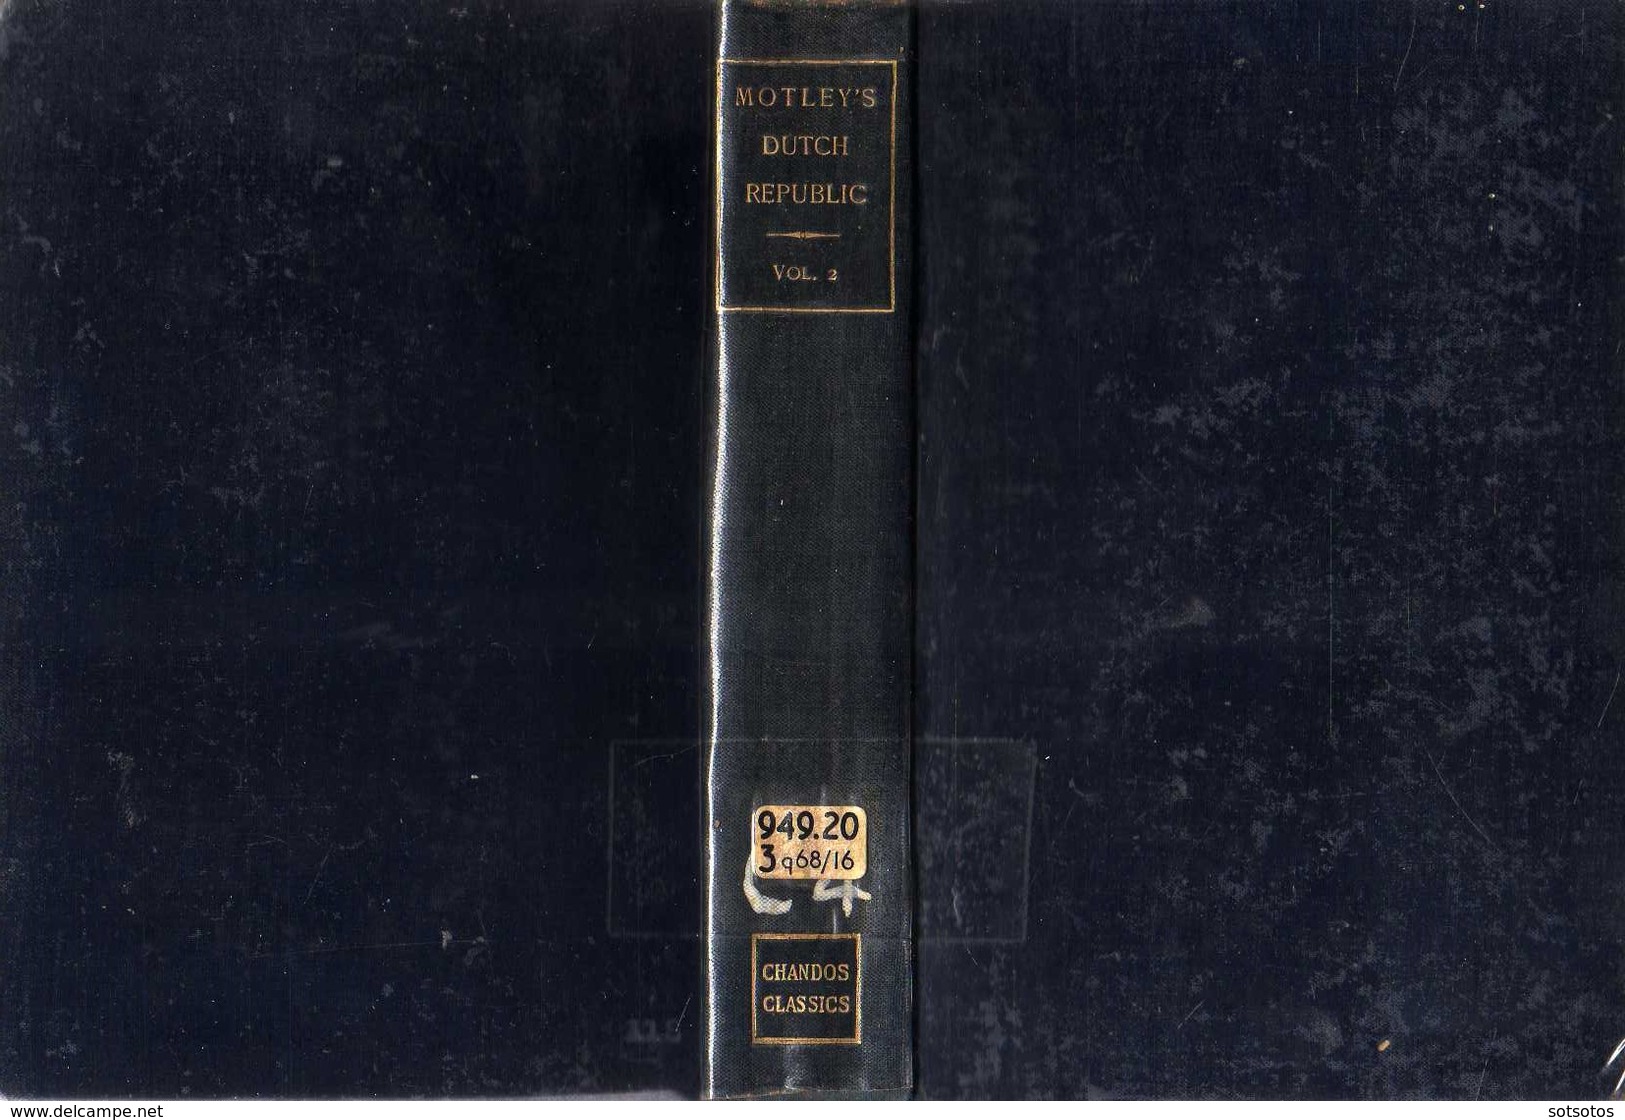 The RISE Of The DUTCH REPUBLIC Vol. II: J. LOTHROP MOTLEY And A.J. MANSFIELD, Ed. Fr. WARNE (1902?), 572 Pages, Good Con - Antiquité